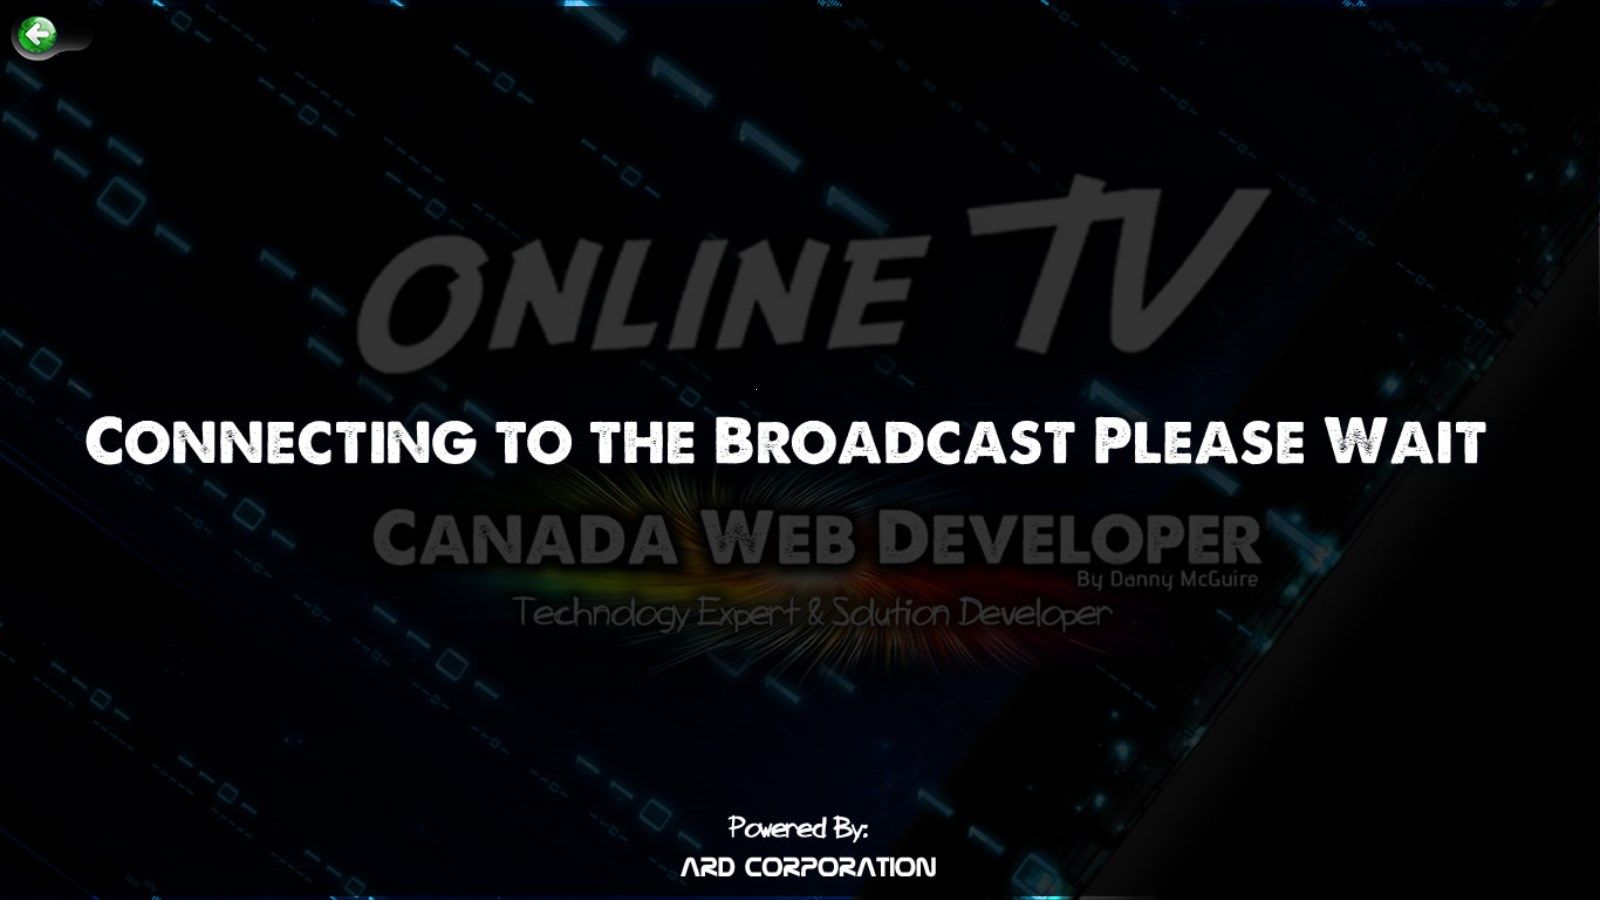 Online TV for Windows 8 and Windows RT Tune In